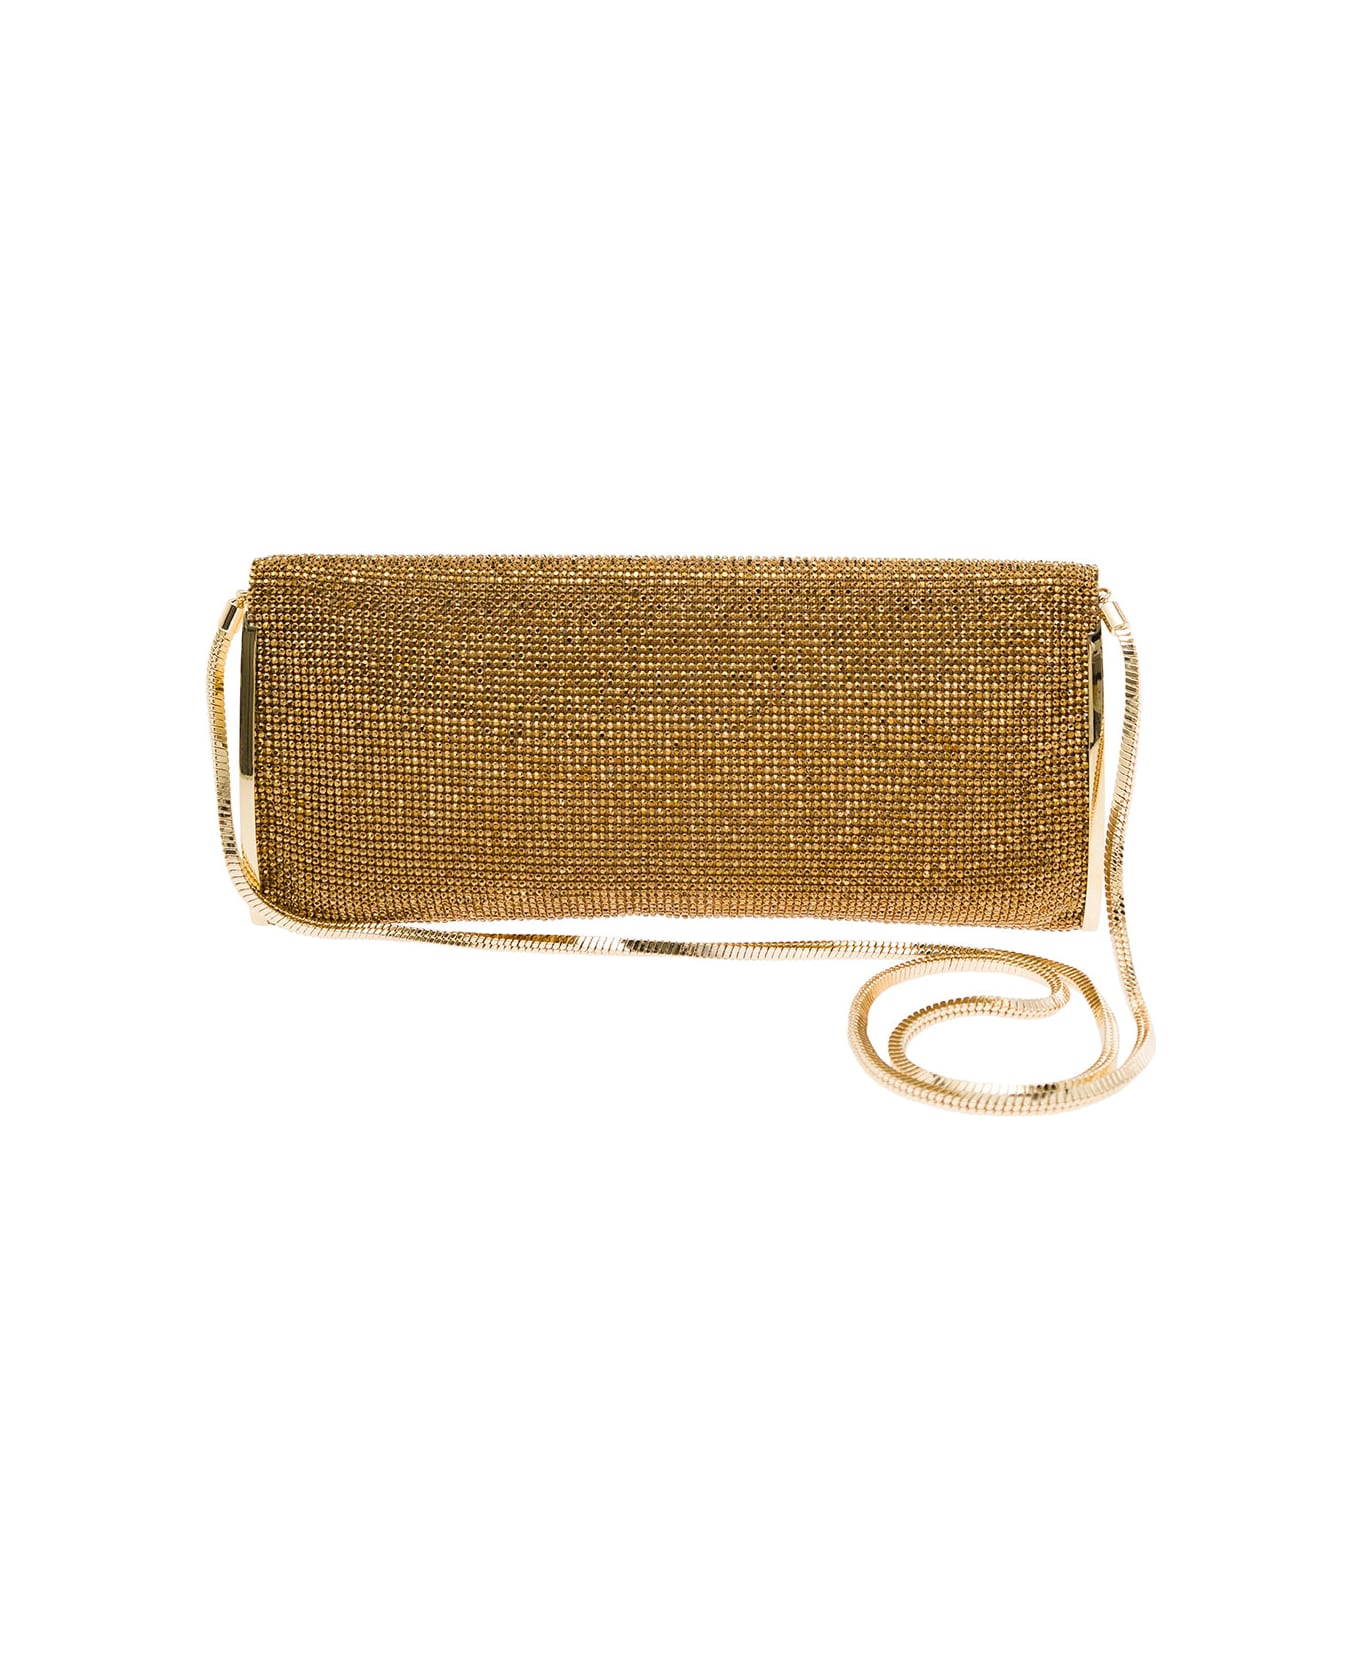 Benedetta Bruzziches 'kate' Gold Clutch With All-over Rhinestone In Mesh Woman - Metallic クラッチバッグ